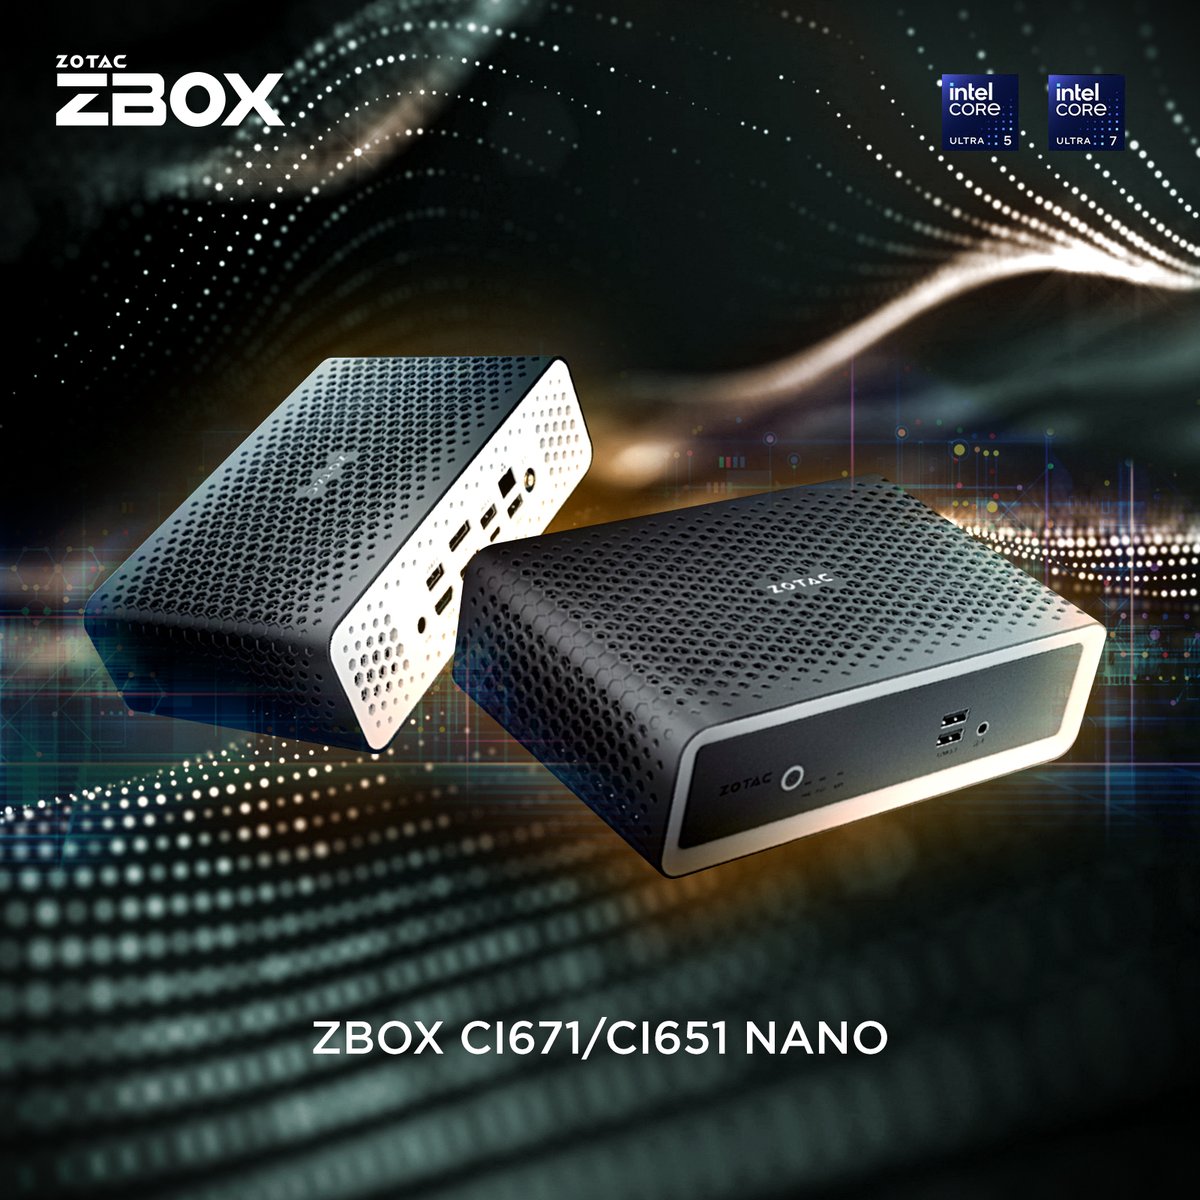 Enjoy the silence. The all-new ZBOX CI671 / CI651 nano is a powerful passive cooled, silent PC. Learn more - bit.ly/3TT7Pda #ZOTAC #ZBOX #CI671 #CI651 #nano